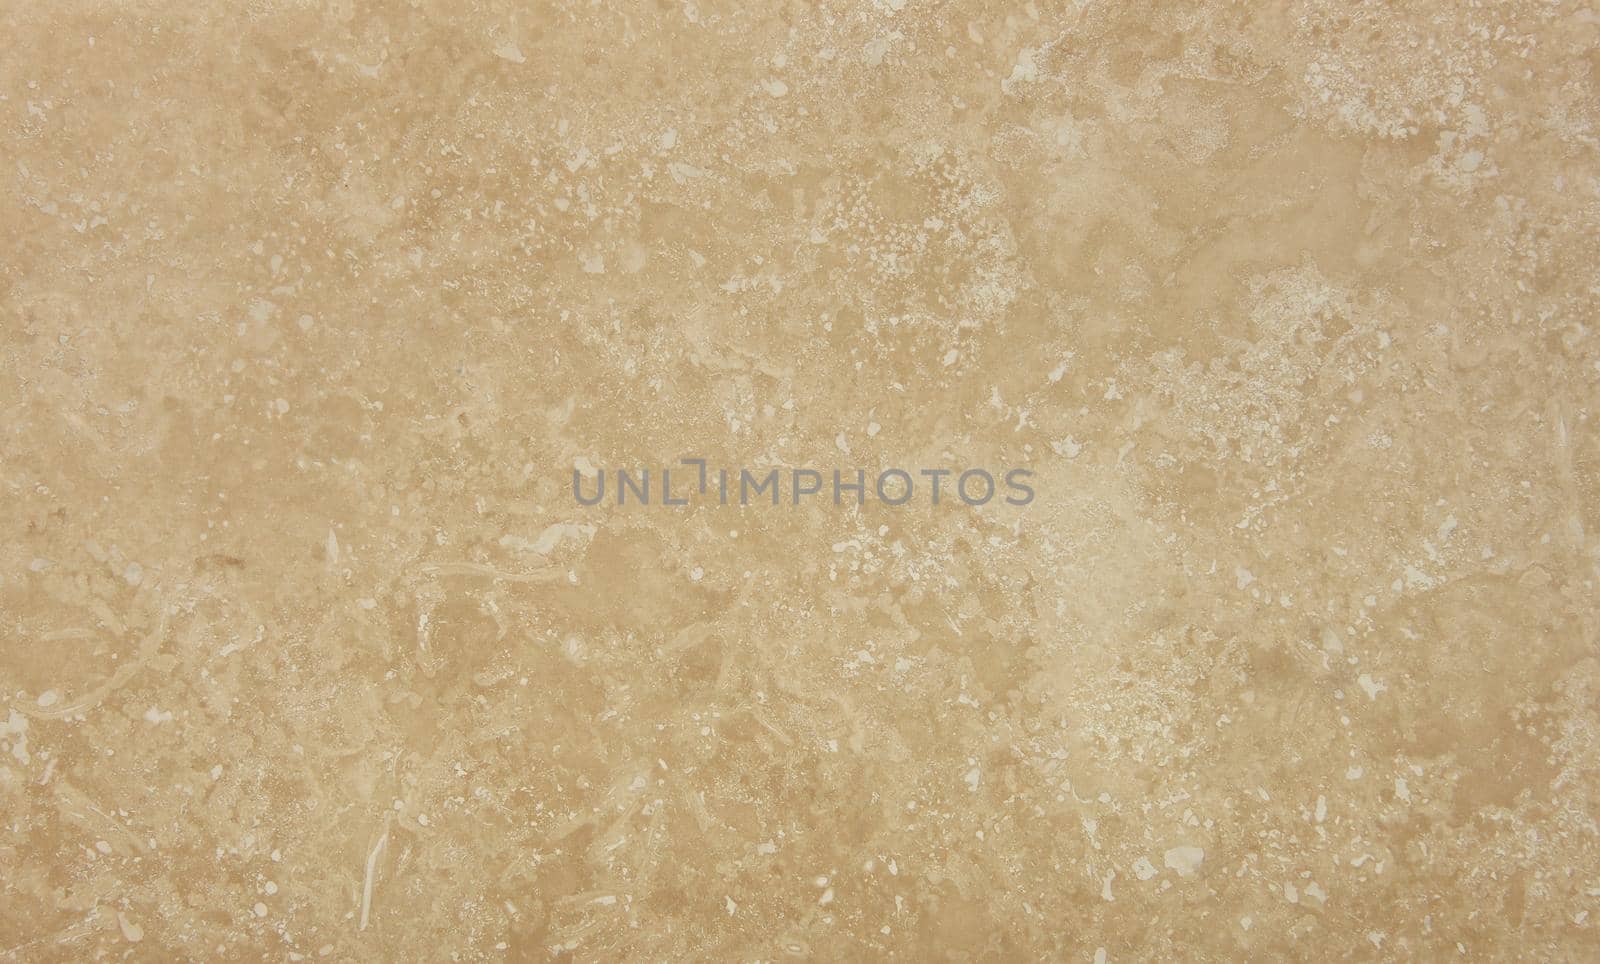 Grunge uneven brown beige marble stone texture background with cracks and stains